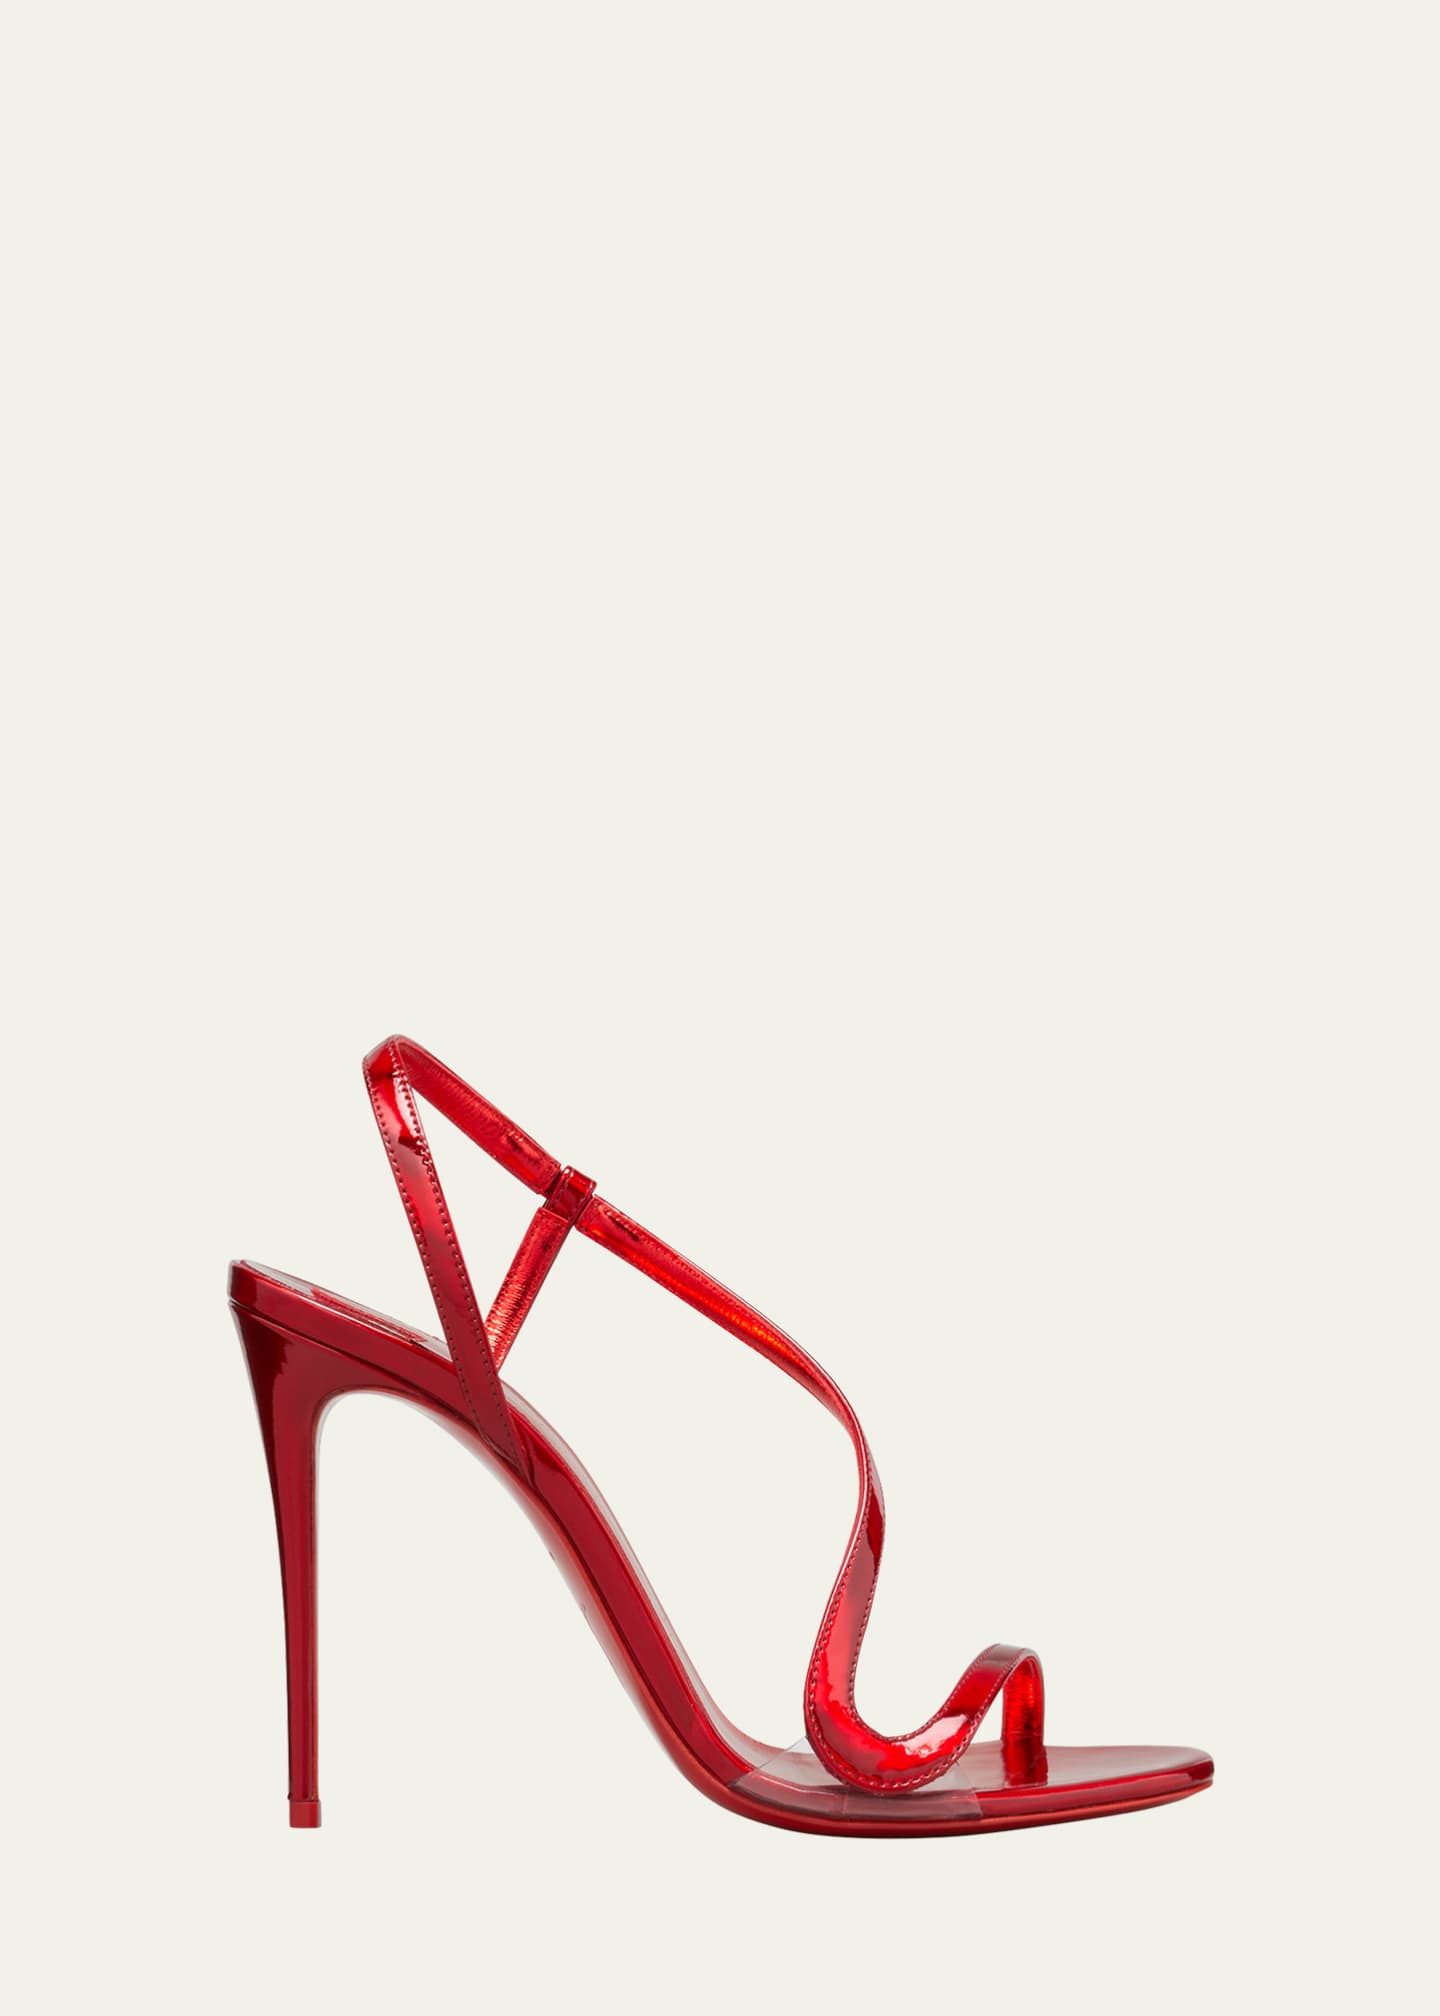 Christian Louboutin Rosalie Patent Red Sole Stiletto Sandals - Bergdorf ...